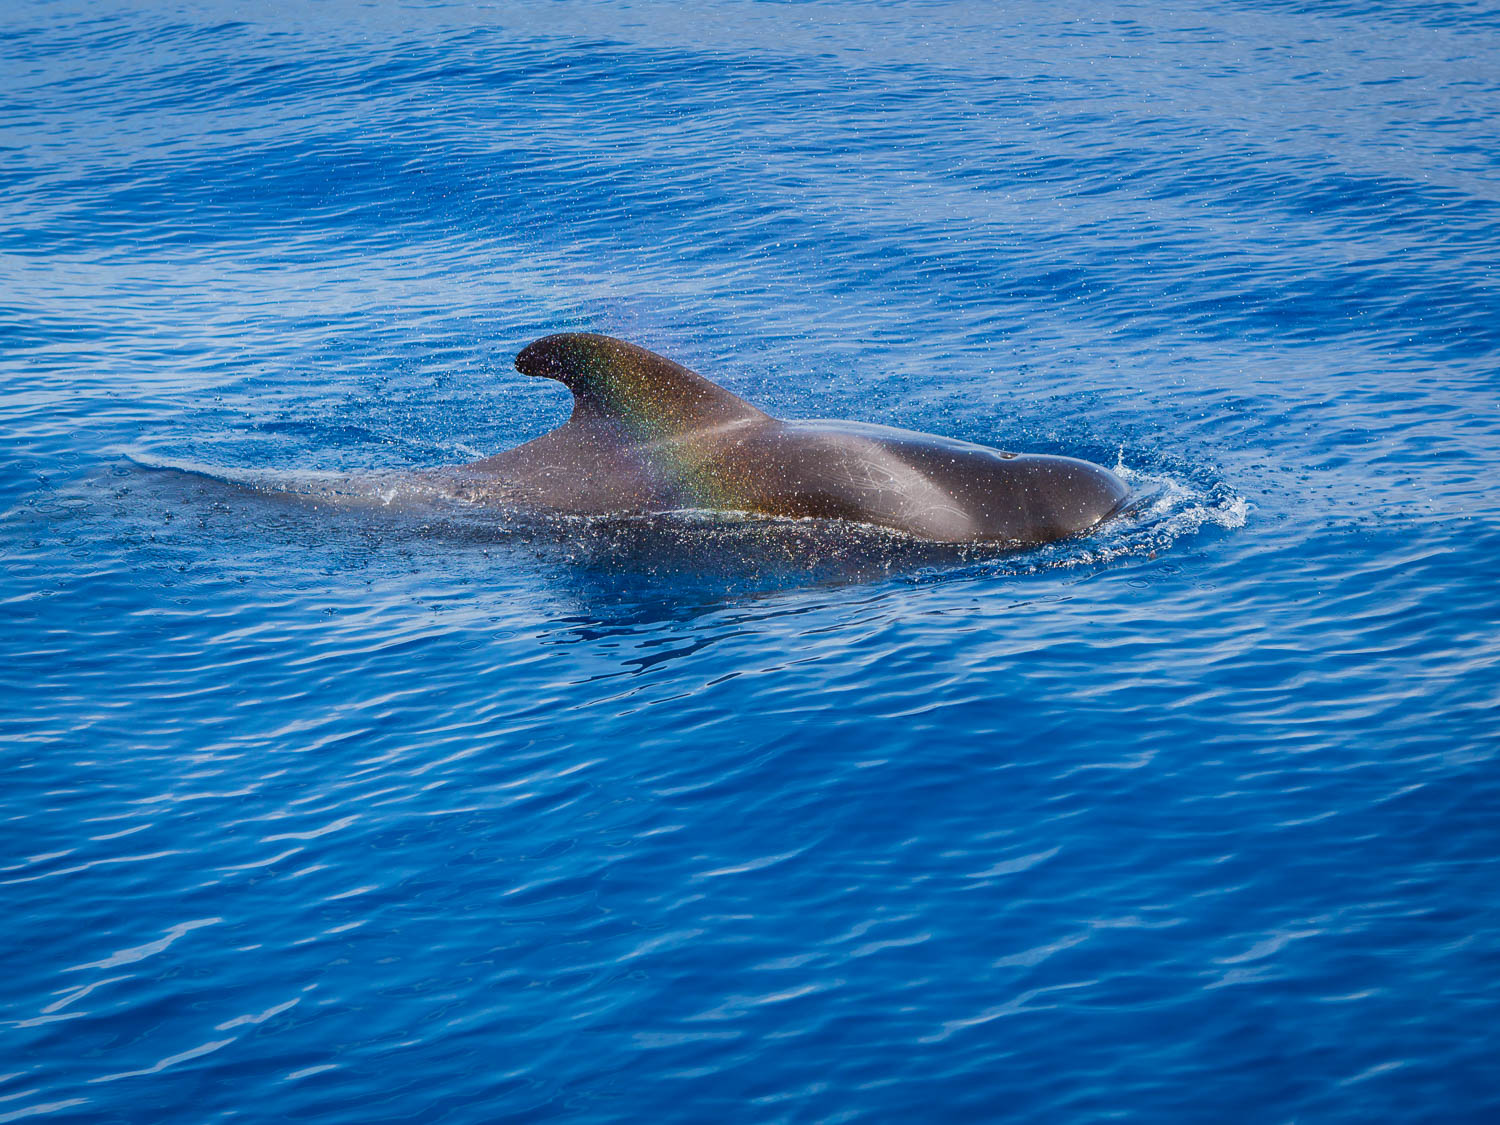 The Rainbow and the Pilot Whale